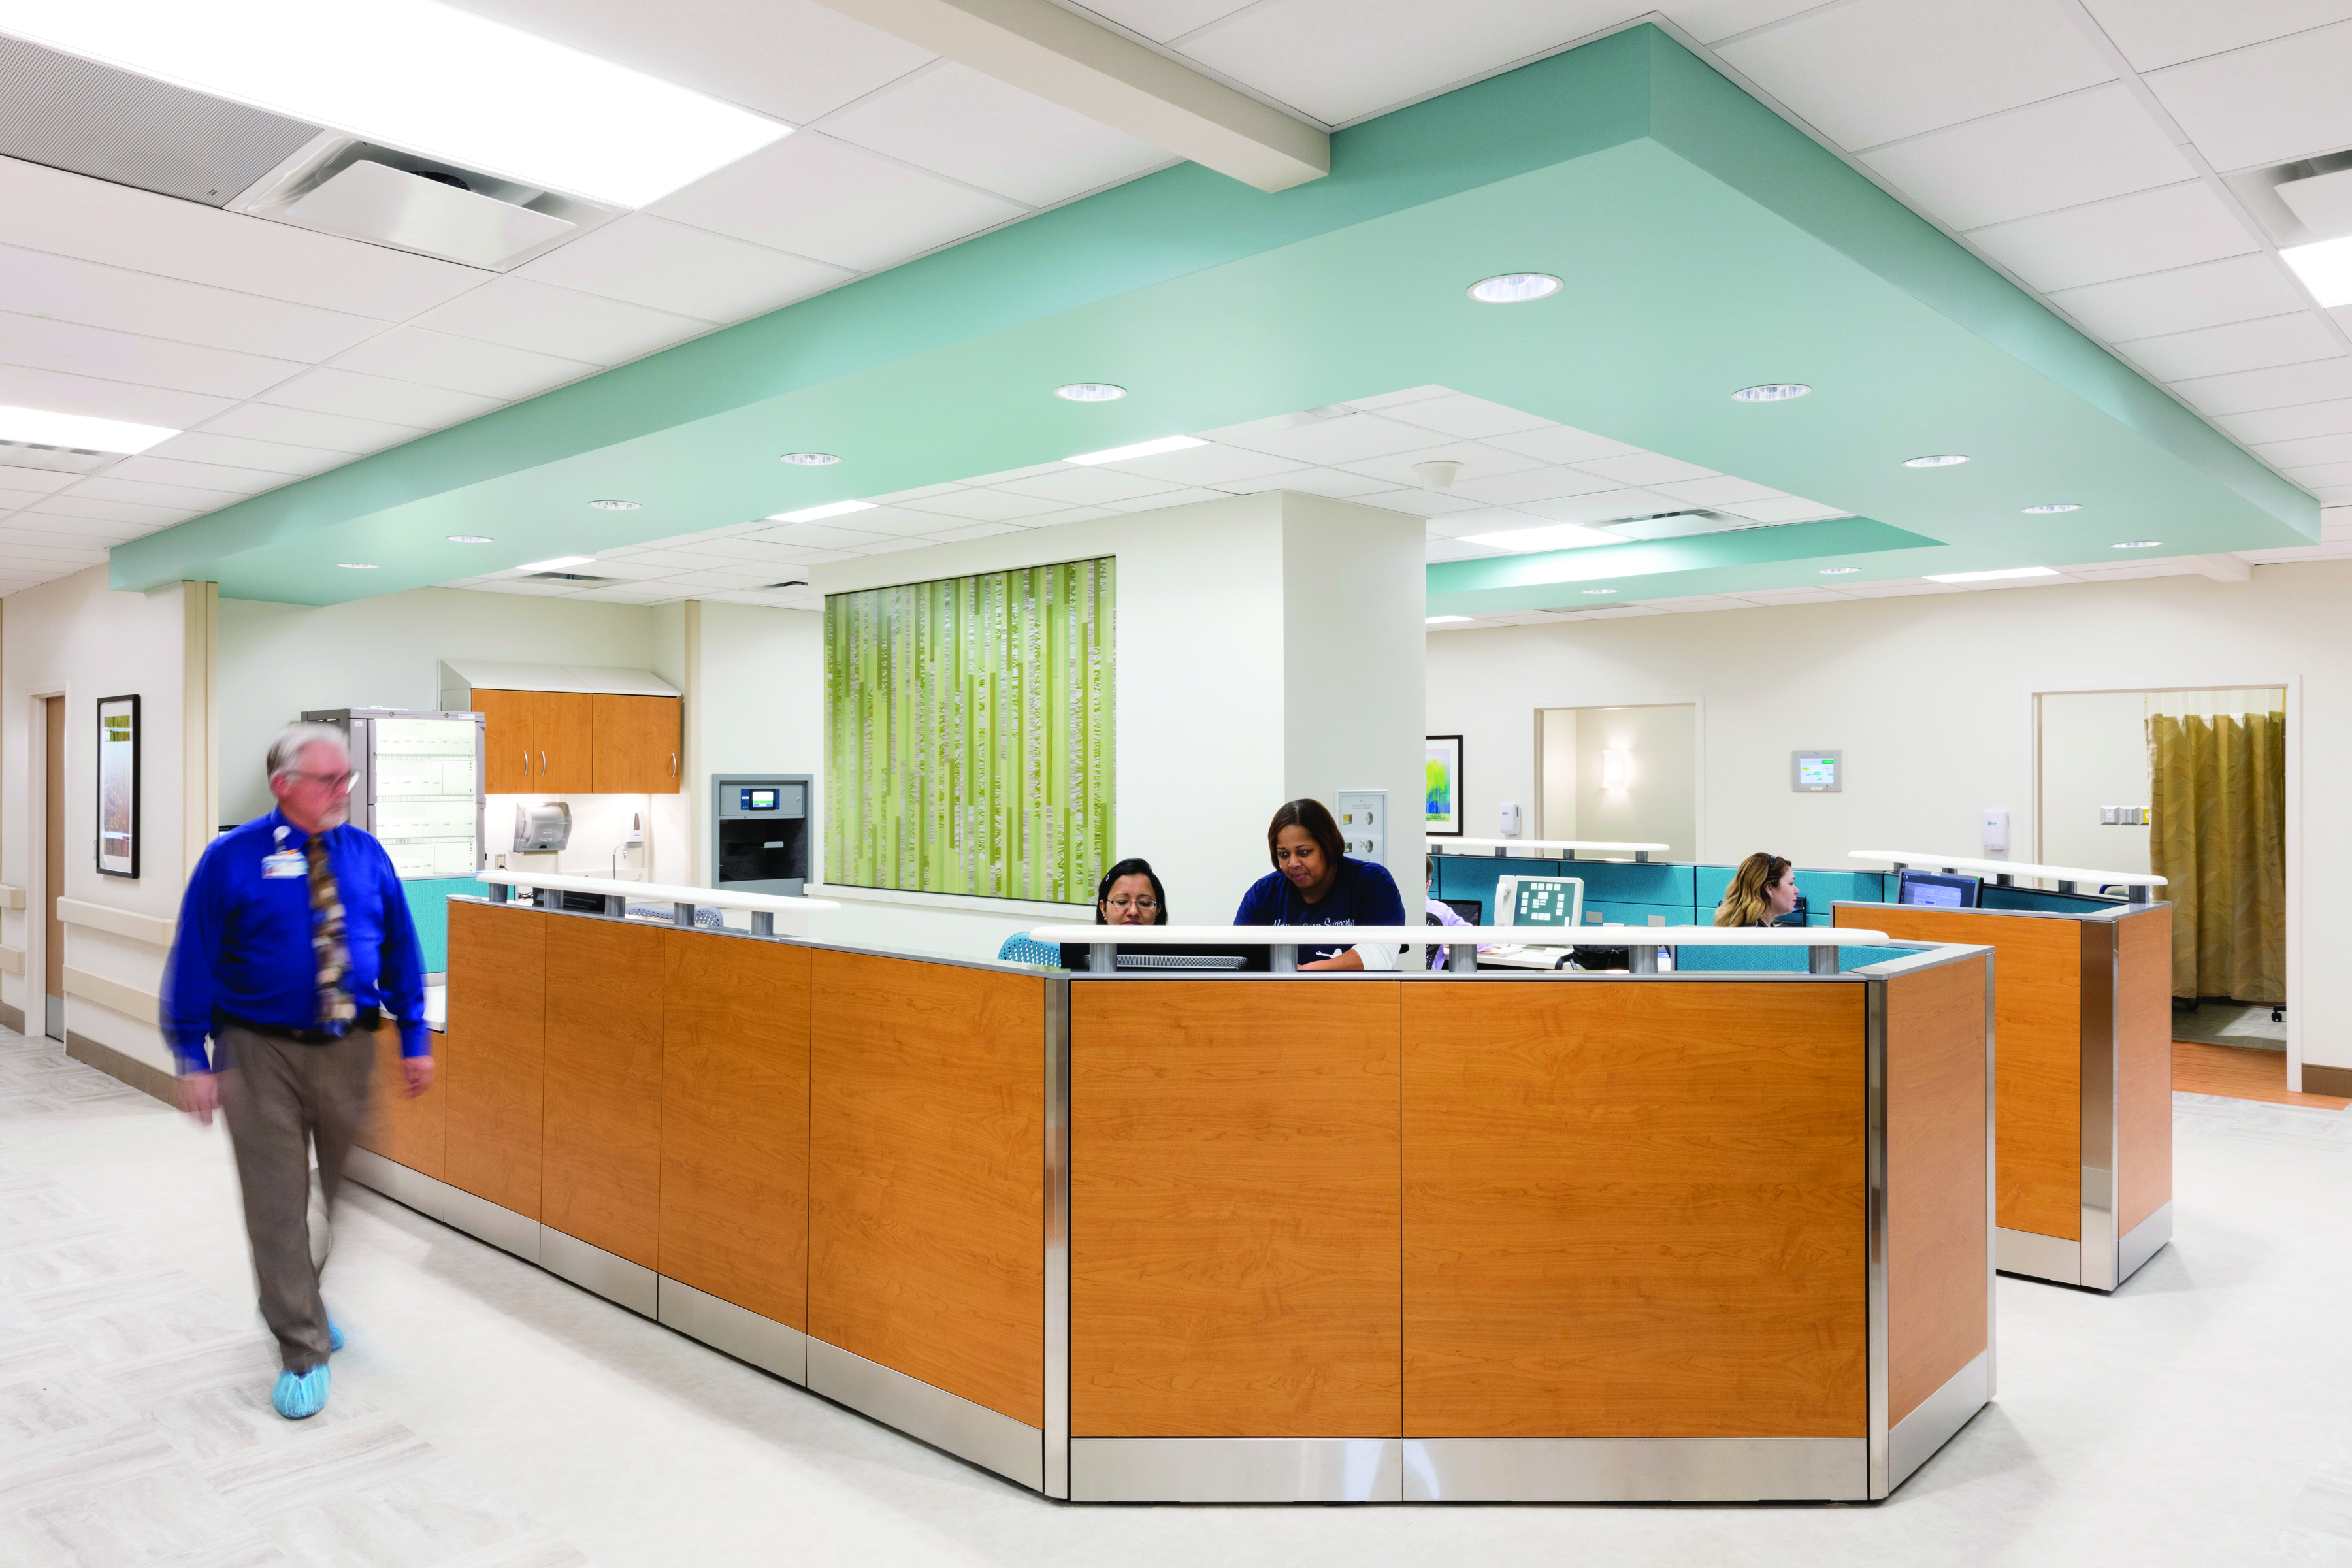 Post-anesthesia care unit bays at CHI St. Luke’s Health–Springwoods Village